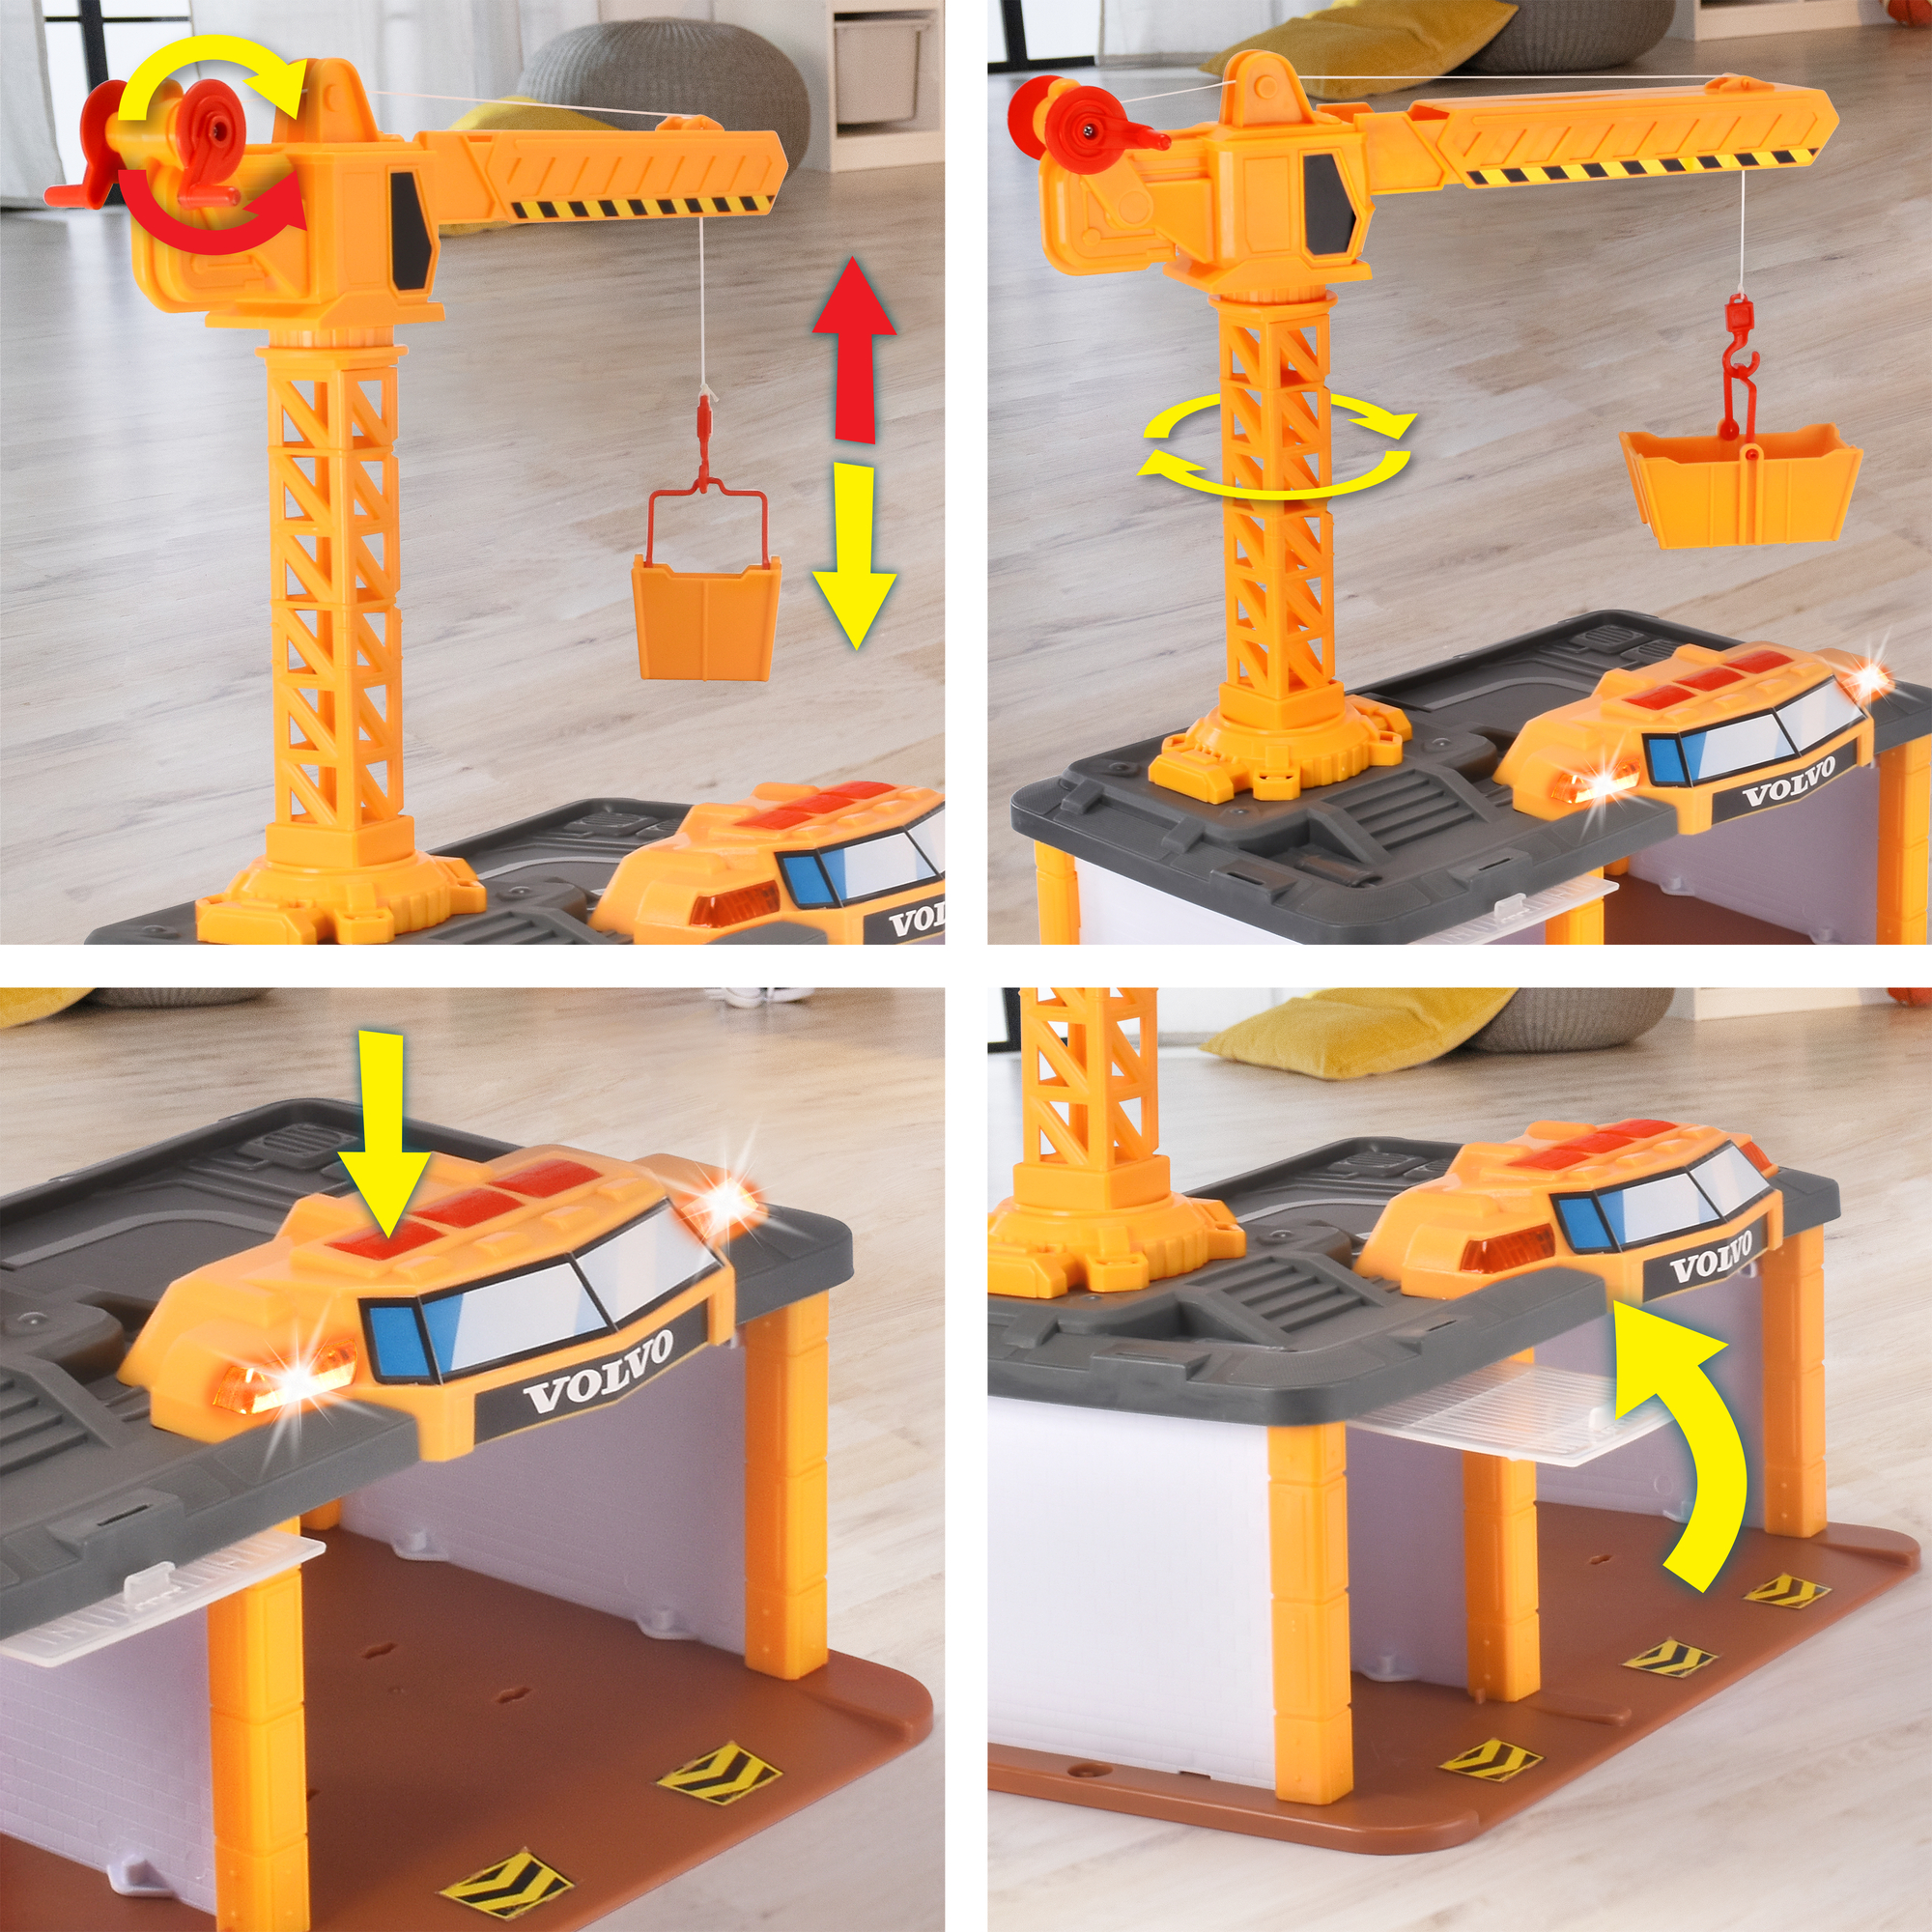 Mehfarbig Try DICKIE-TOYS Station, Volvo Spielset Me Construction